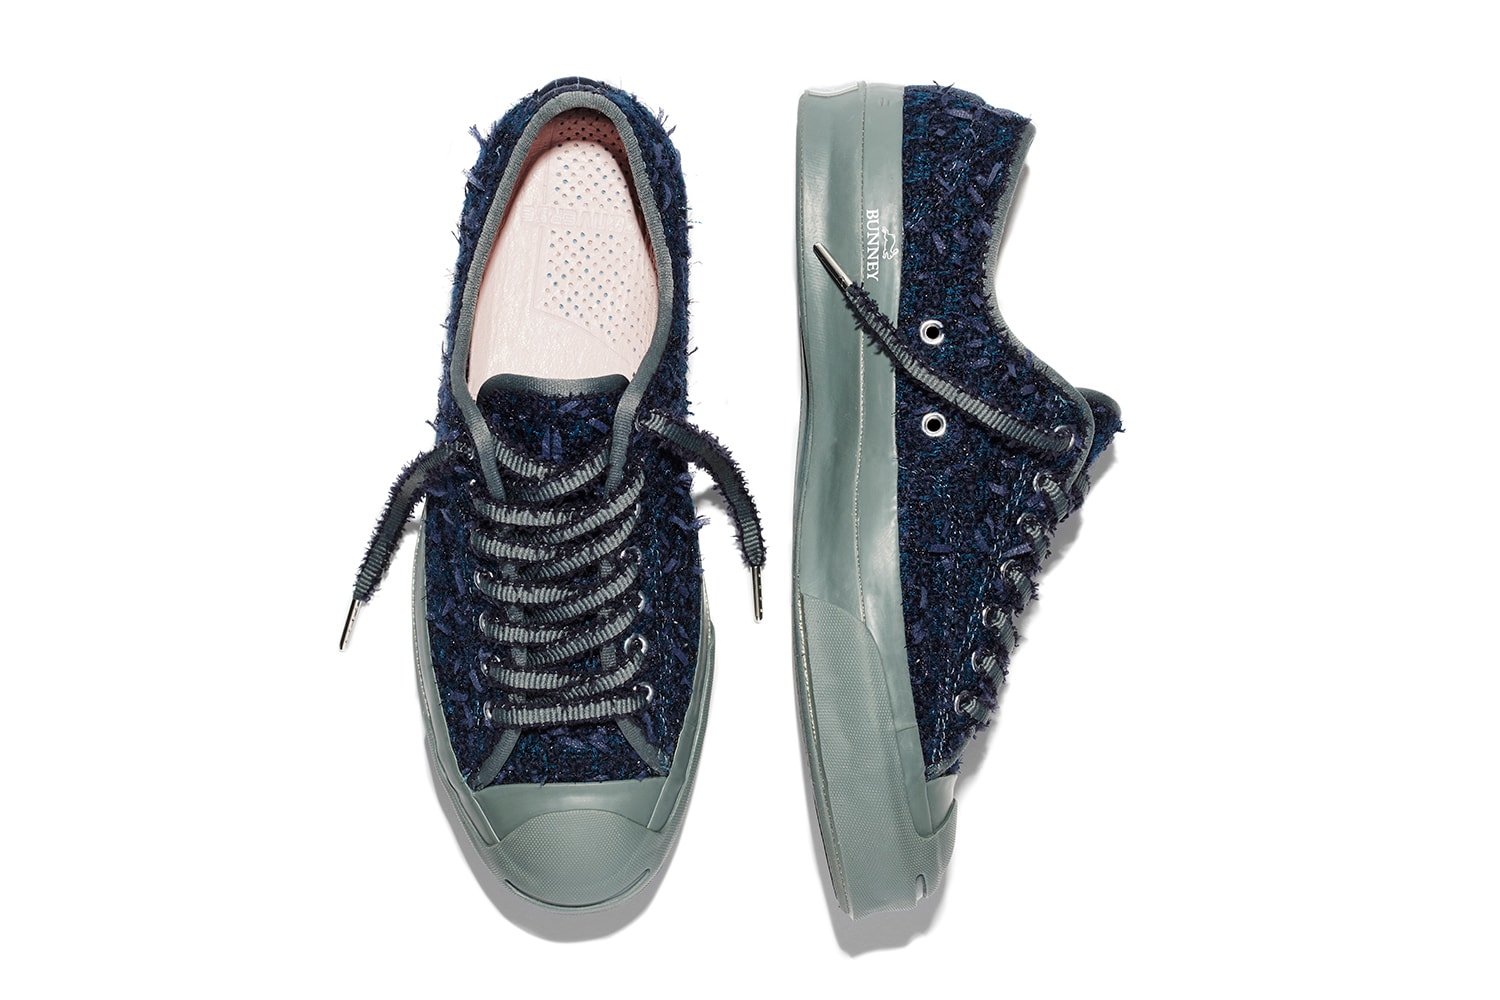 Converse x BUNNEY Jack Purcell Signature